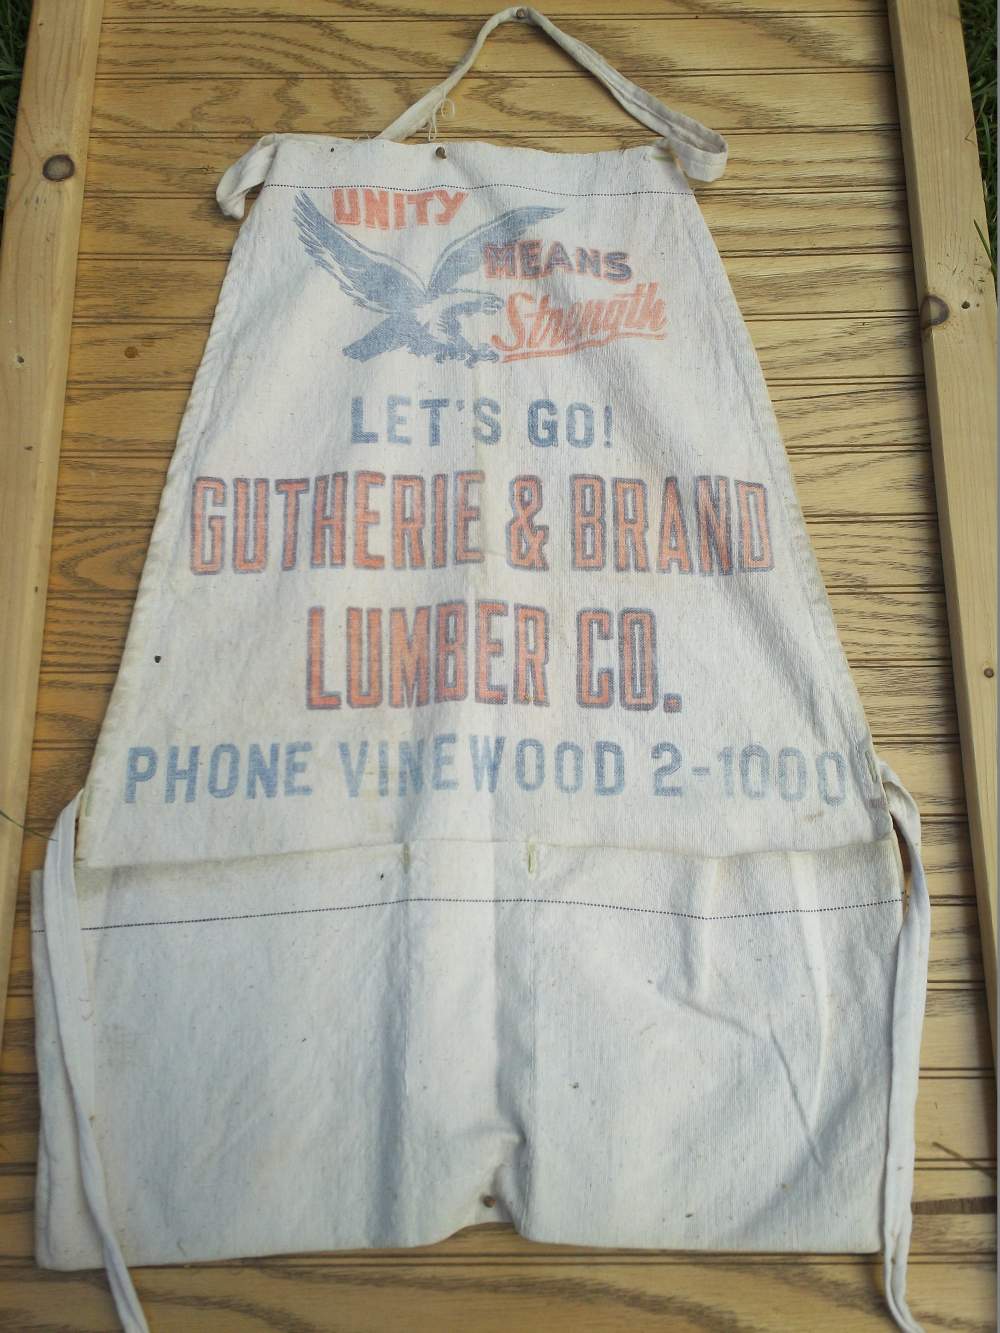 Name:  GLC Gutherie and Brand Lumber.jpg
Views: 895
Size:  142.7 KB